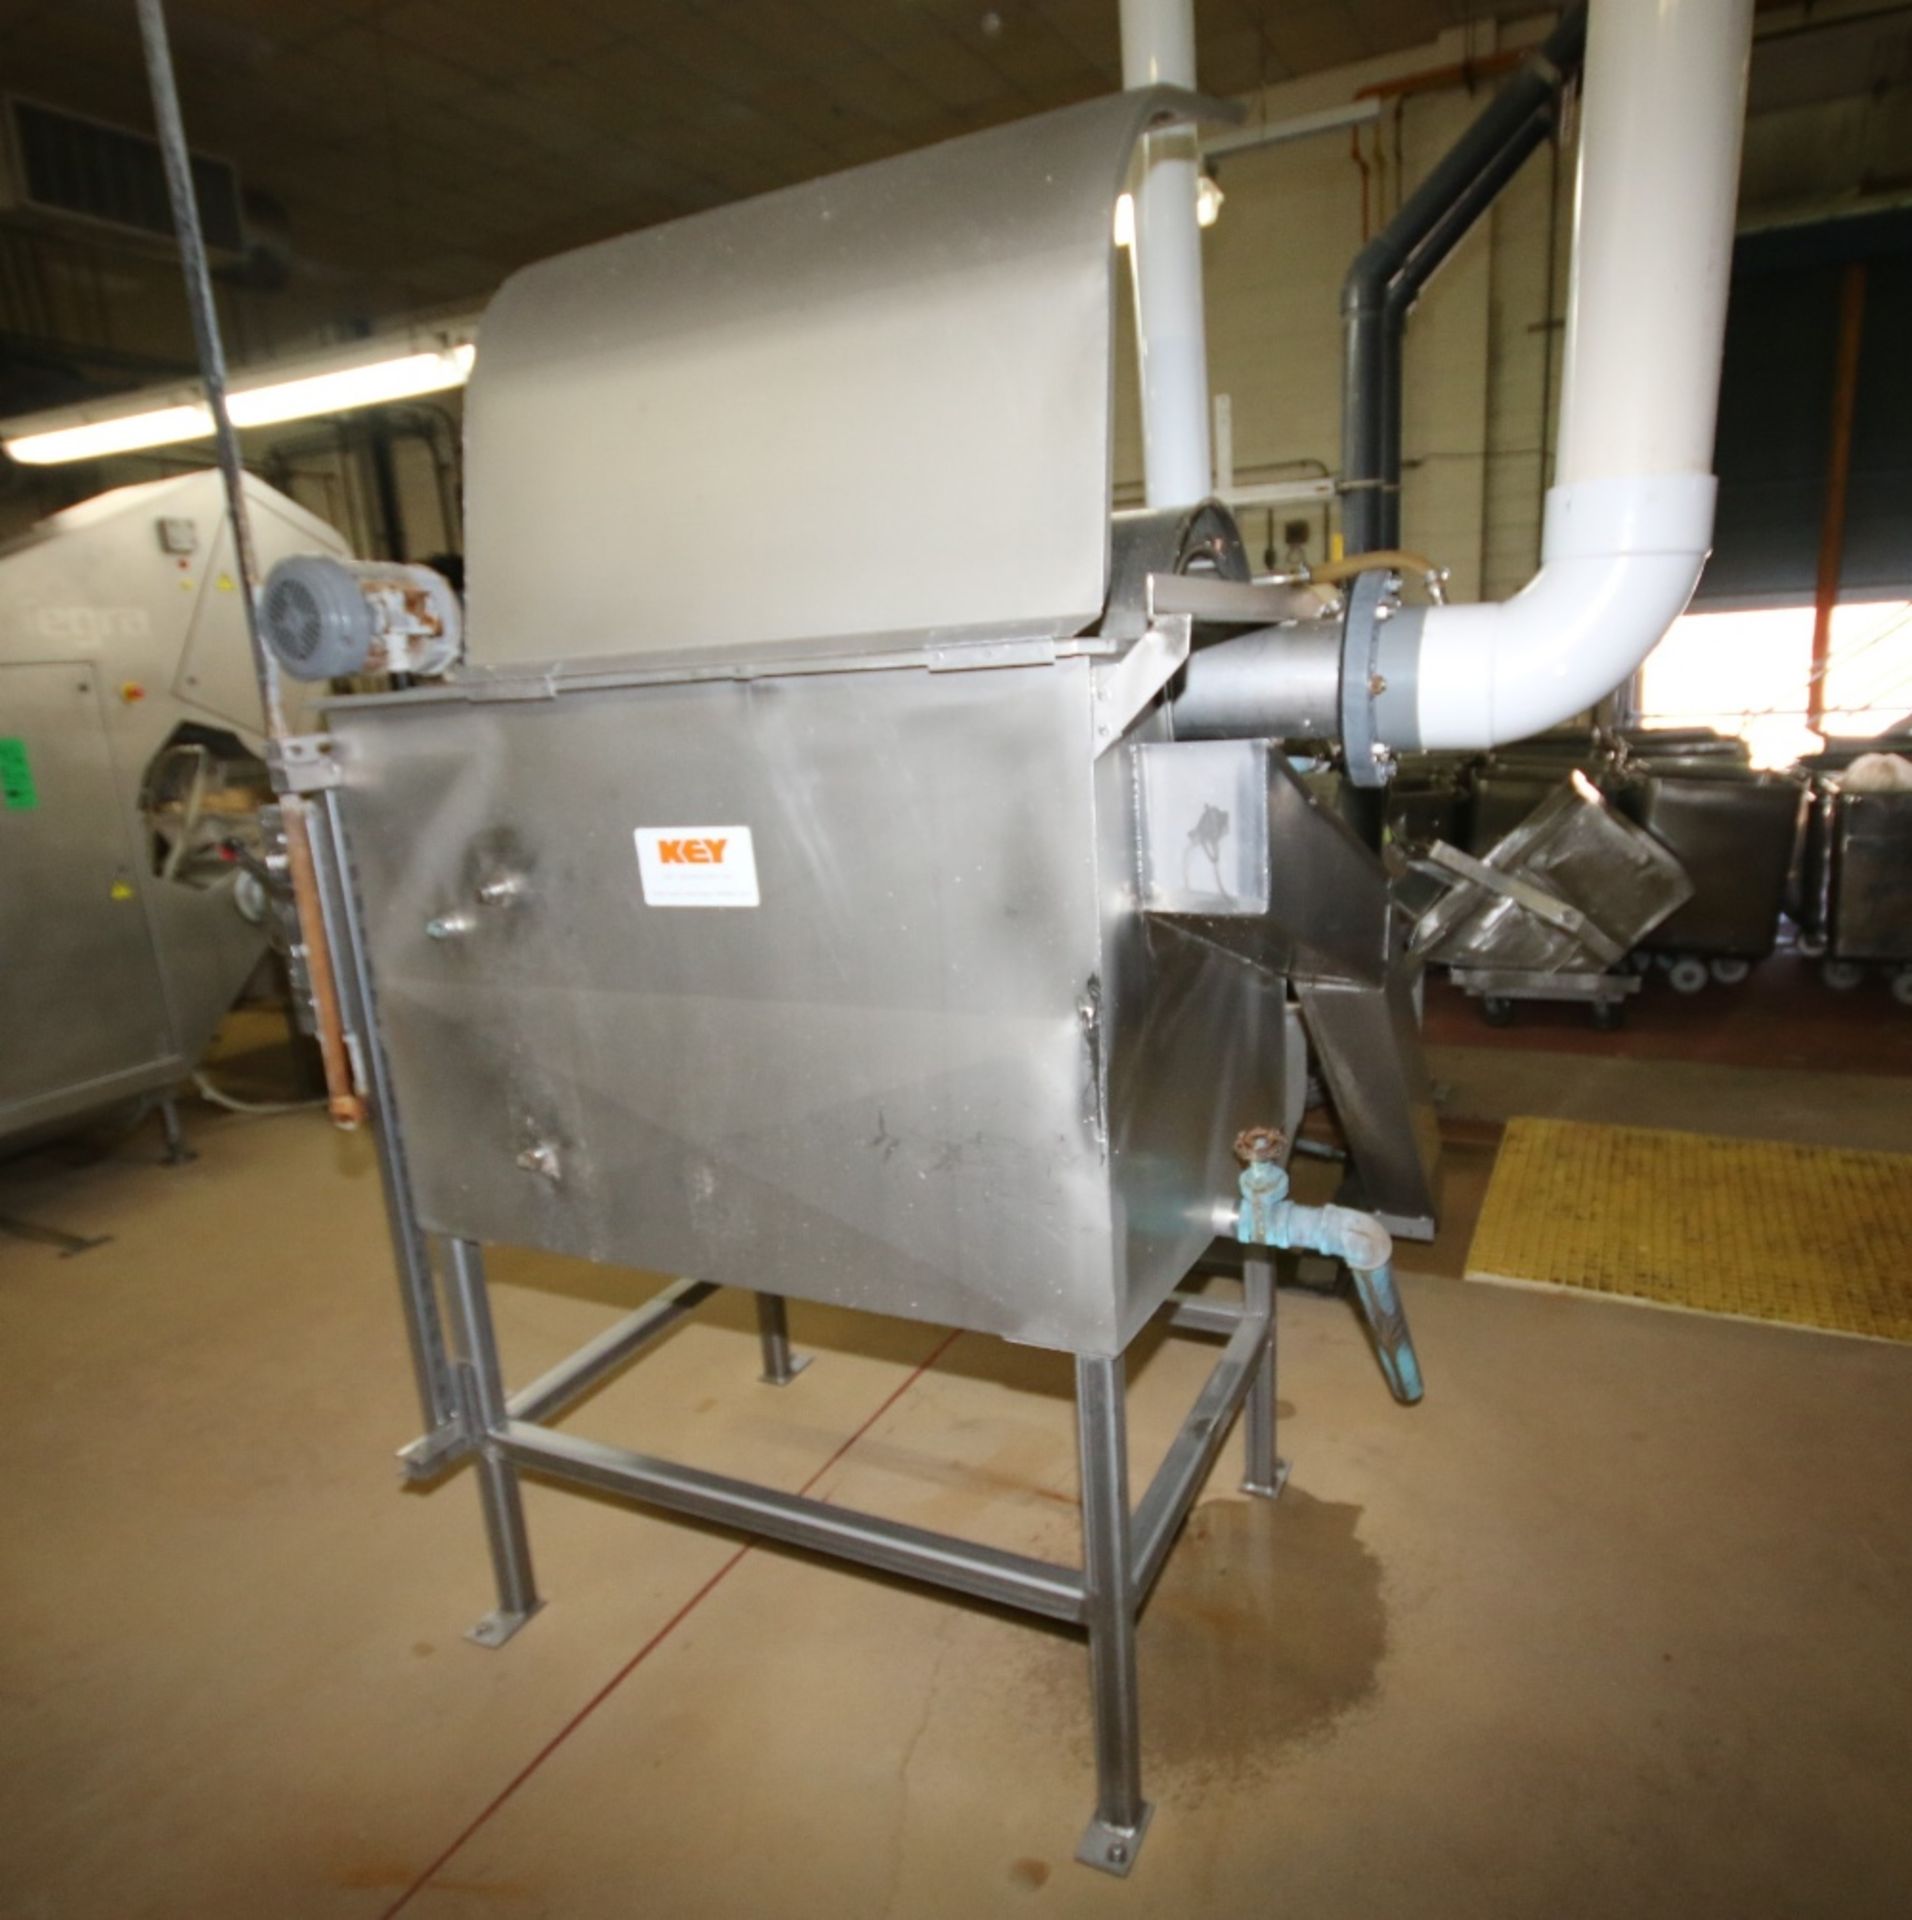 Key S/S 18" W x 34" L x S/S Rotary Drum Screen / Fume Tank, with Electric Drive Motor, S/S Frame & - Image 4 of 5